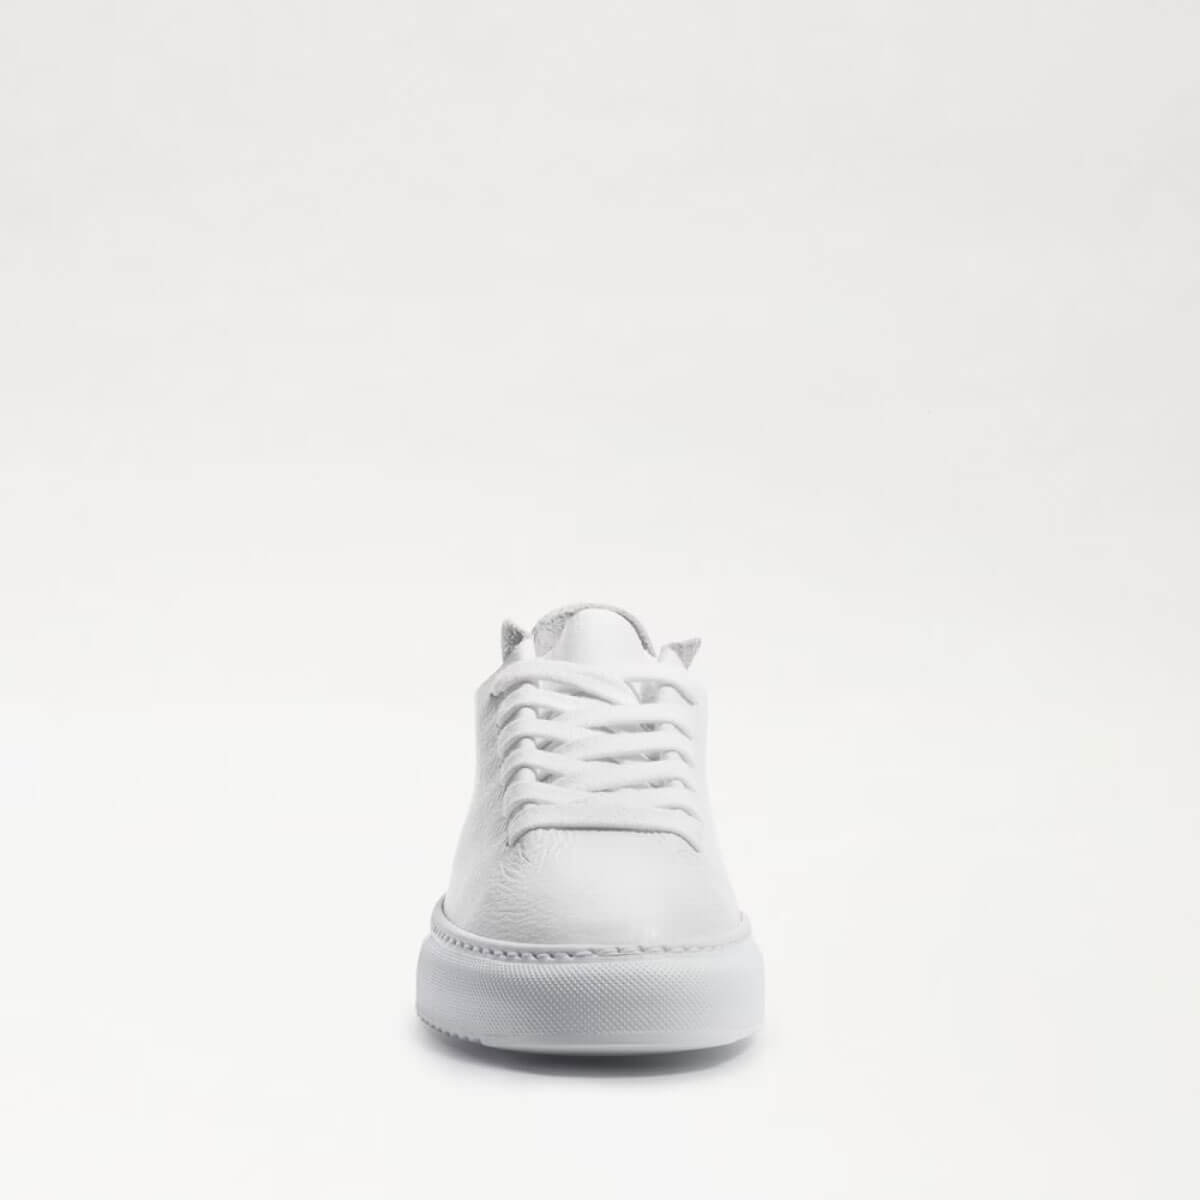 Sam Edelman Poppy Lace-Up Sneaker white front | MILK MONEY milkmoney.co | cute shoes for women. ladies shoes. nice shoes for women. footwear for women. ladies shoes online. ladies footwear. womens shoes and boots. pretty shoes for women. beautiful shoes for women.